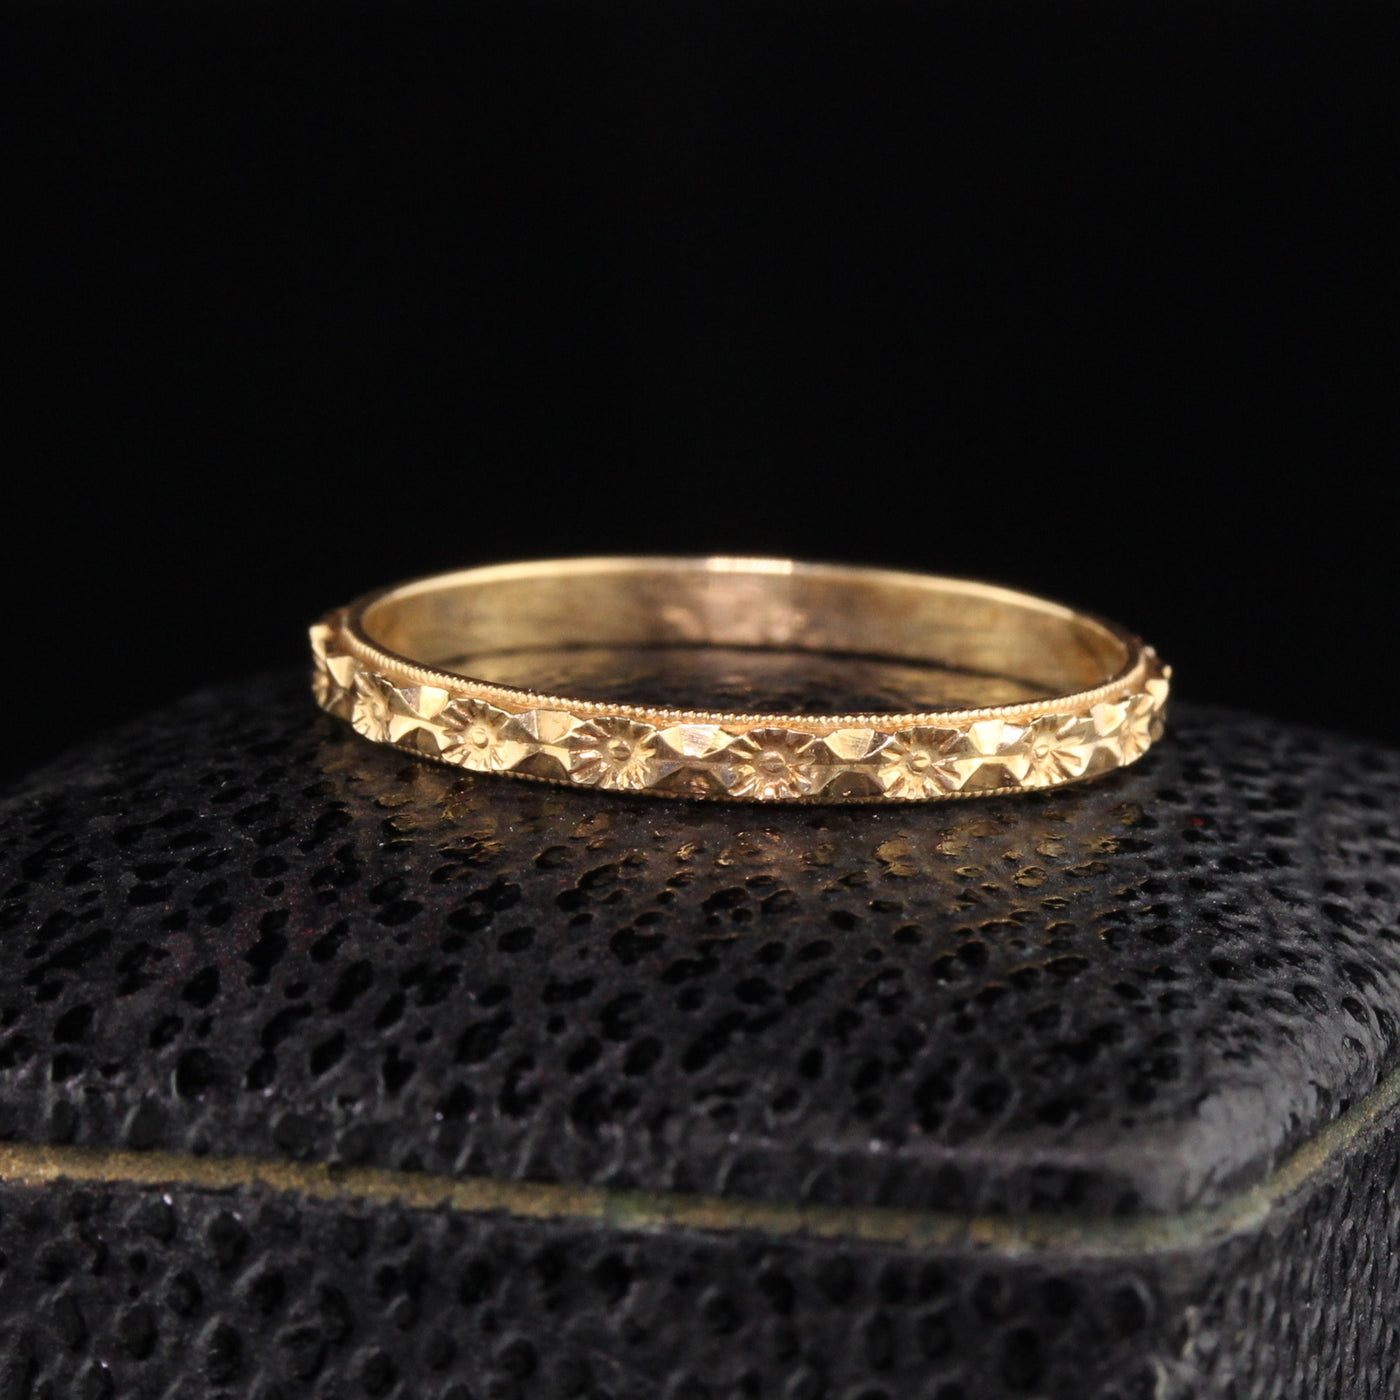 Antique Art Deco 14K Yellow Gold Engraved Wedding Band - Size 7 1/2